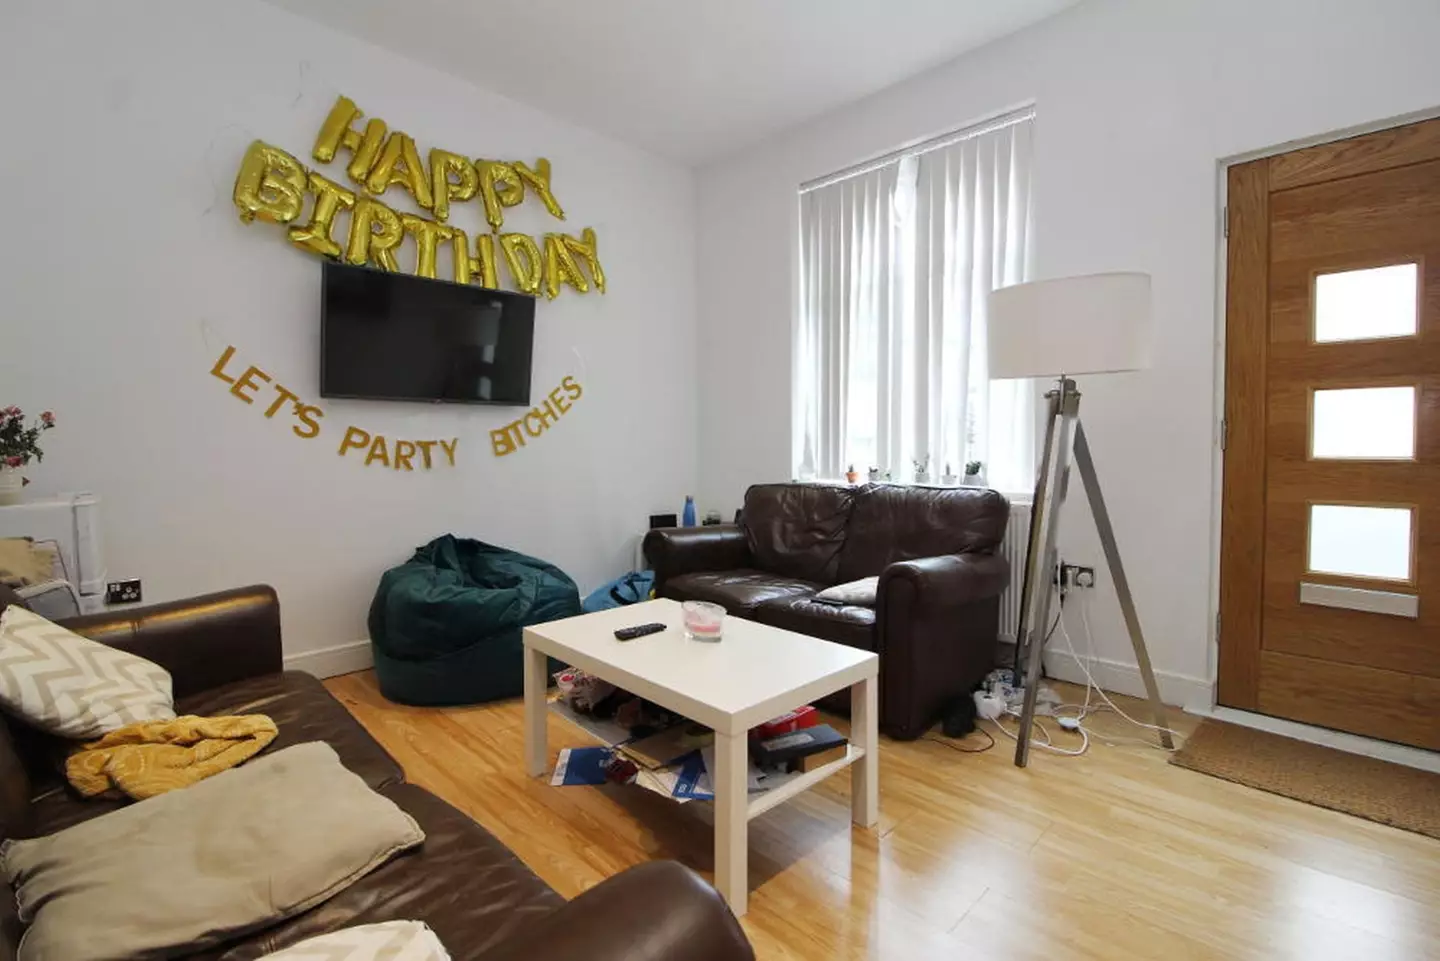 Estate agents did not notice the 'bitches' sign in the living room pictures (